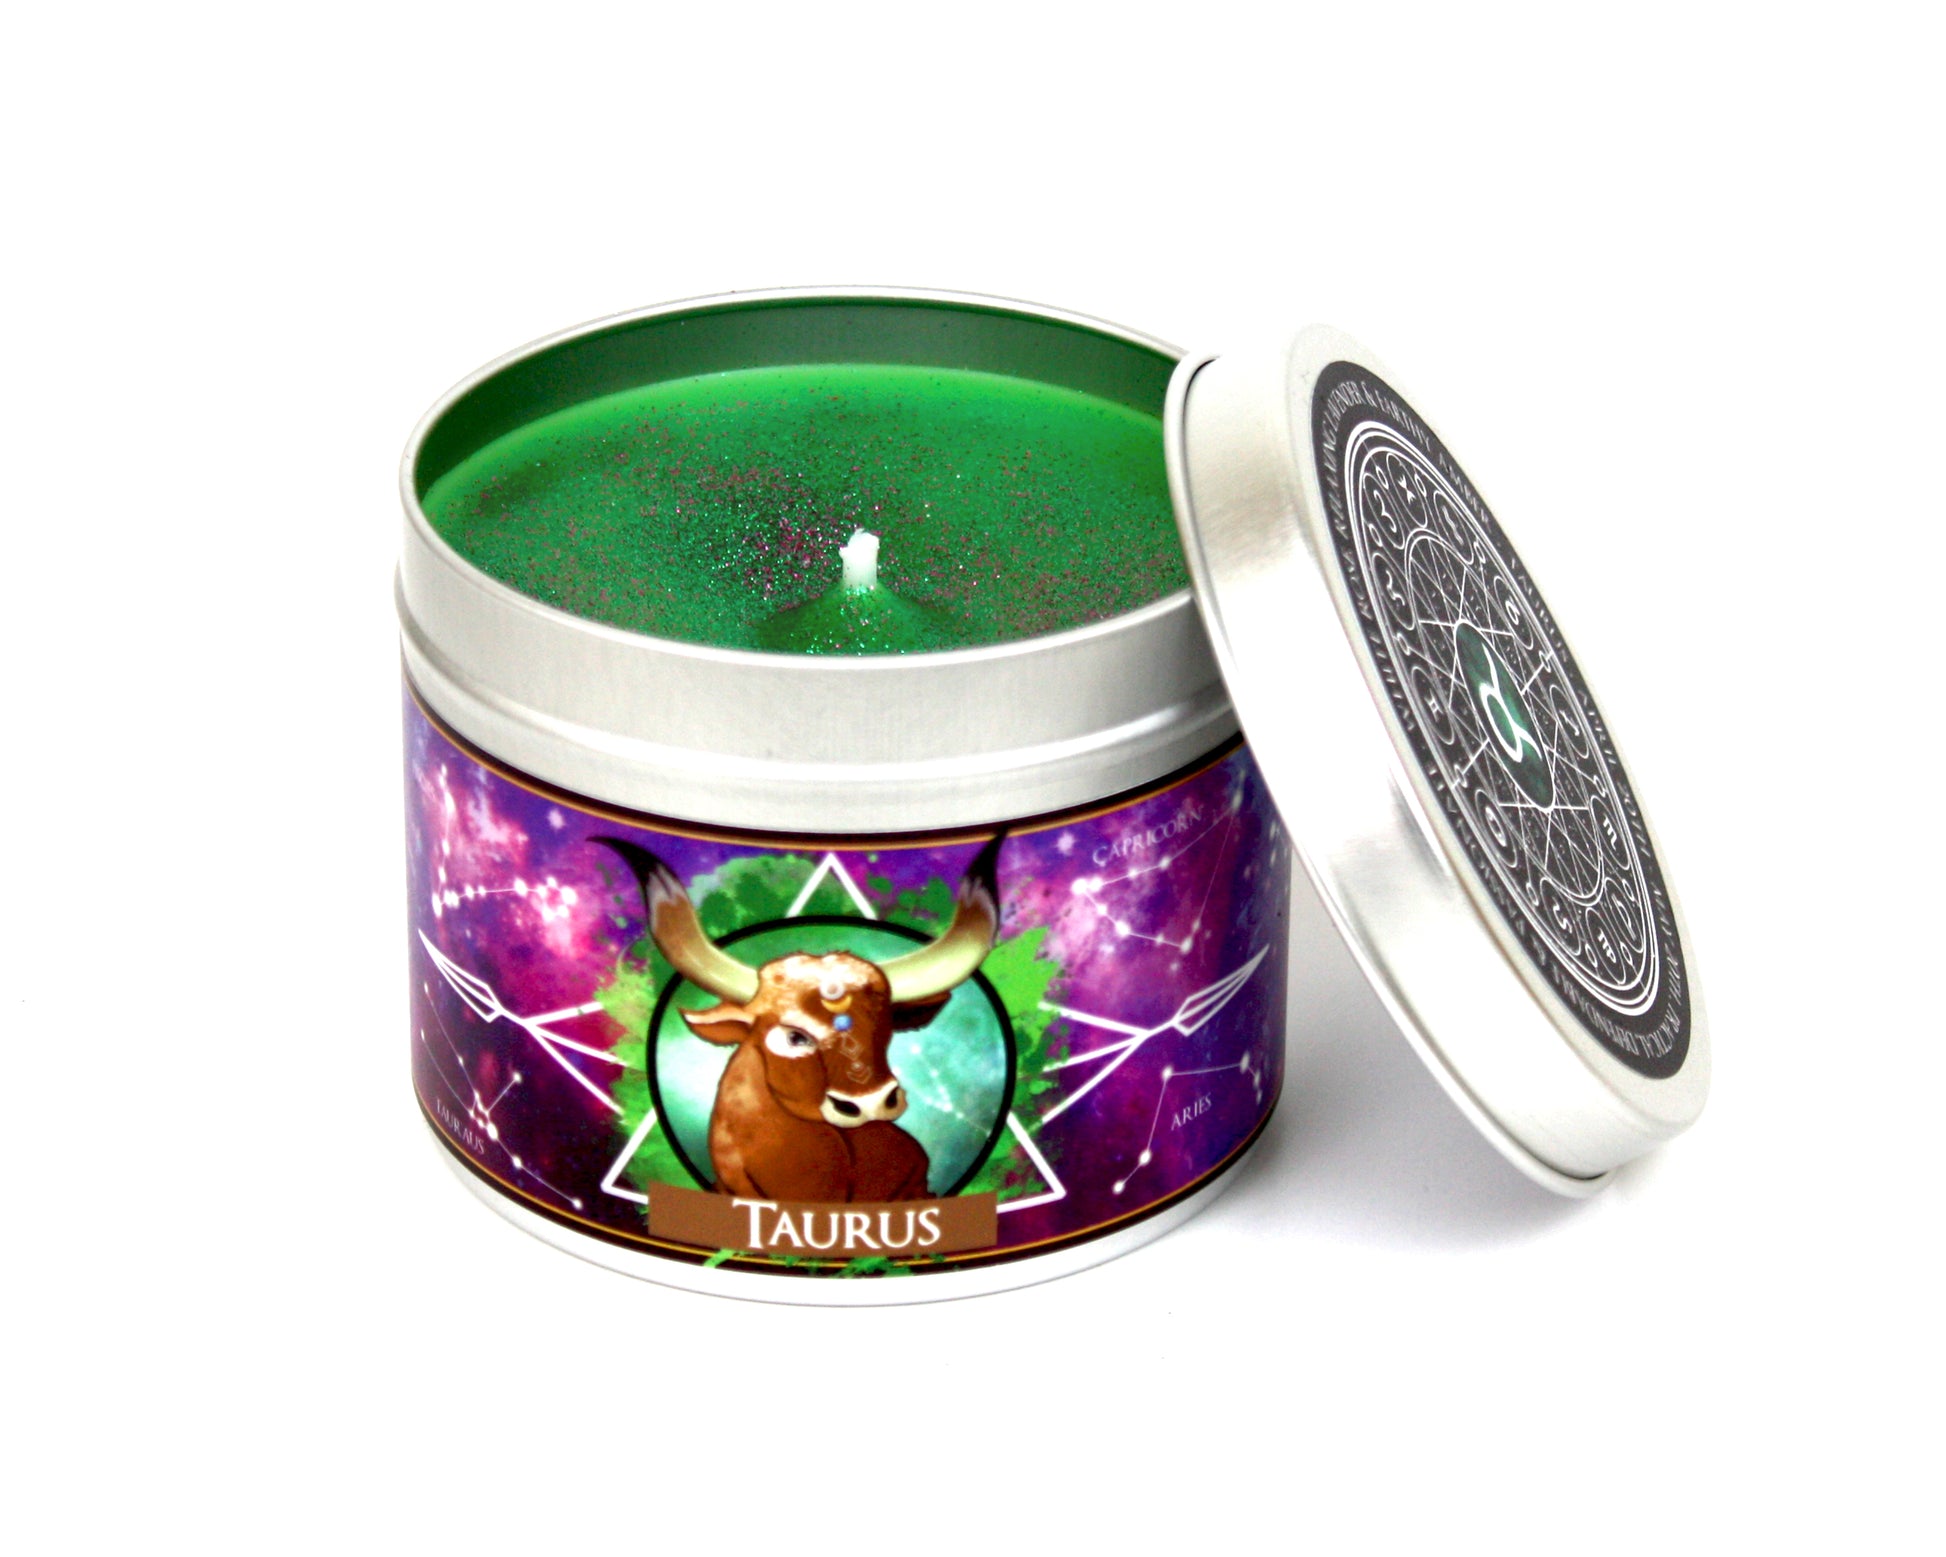 Taurus Zodiac Scented Candle with green wax | Happy Piranha